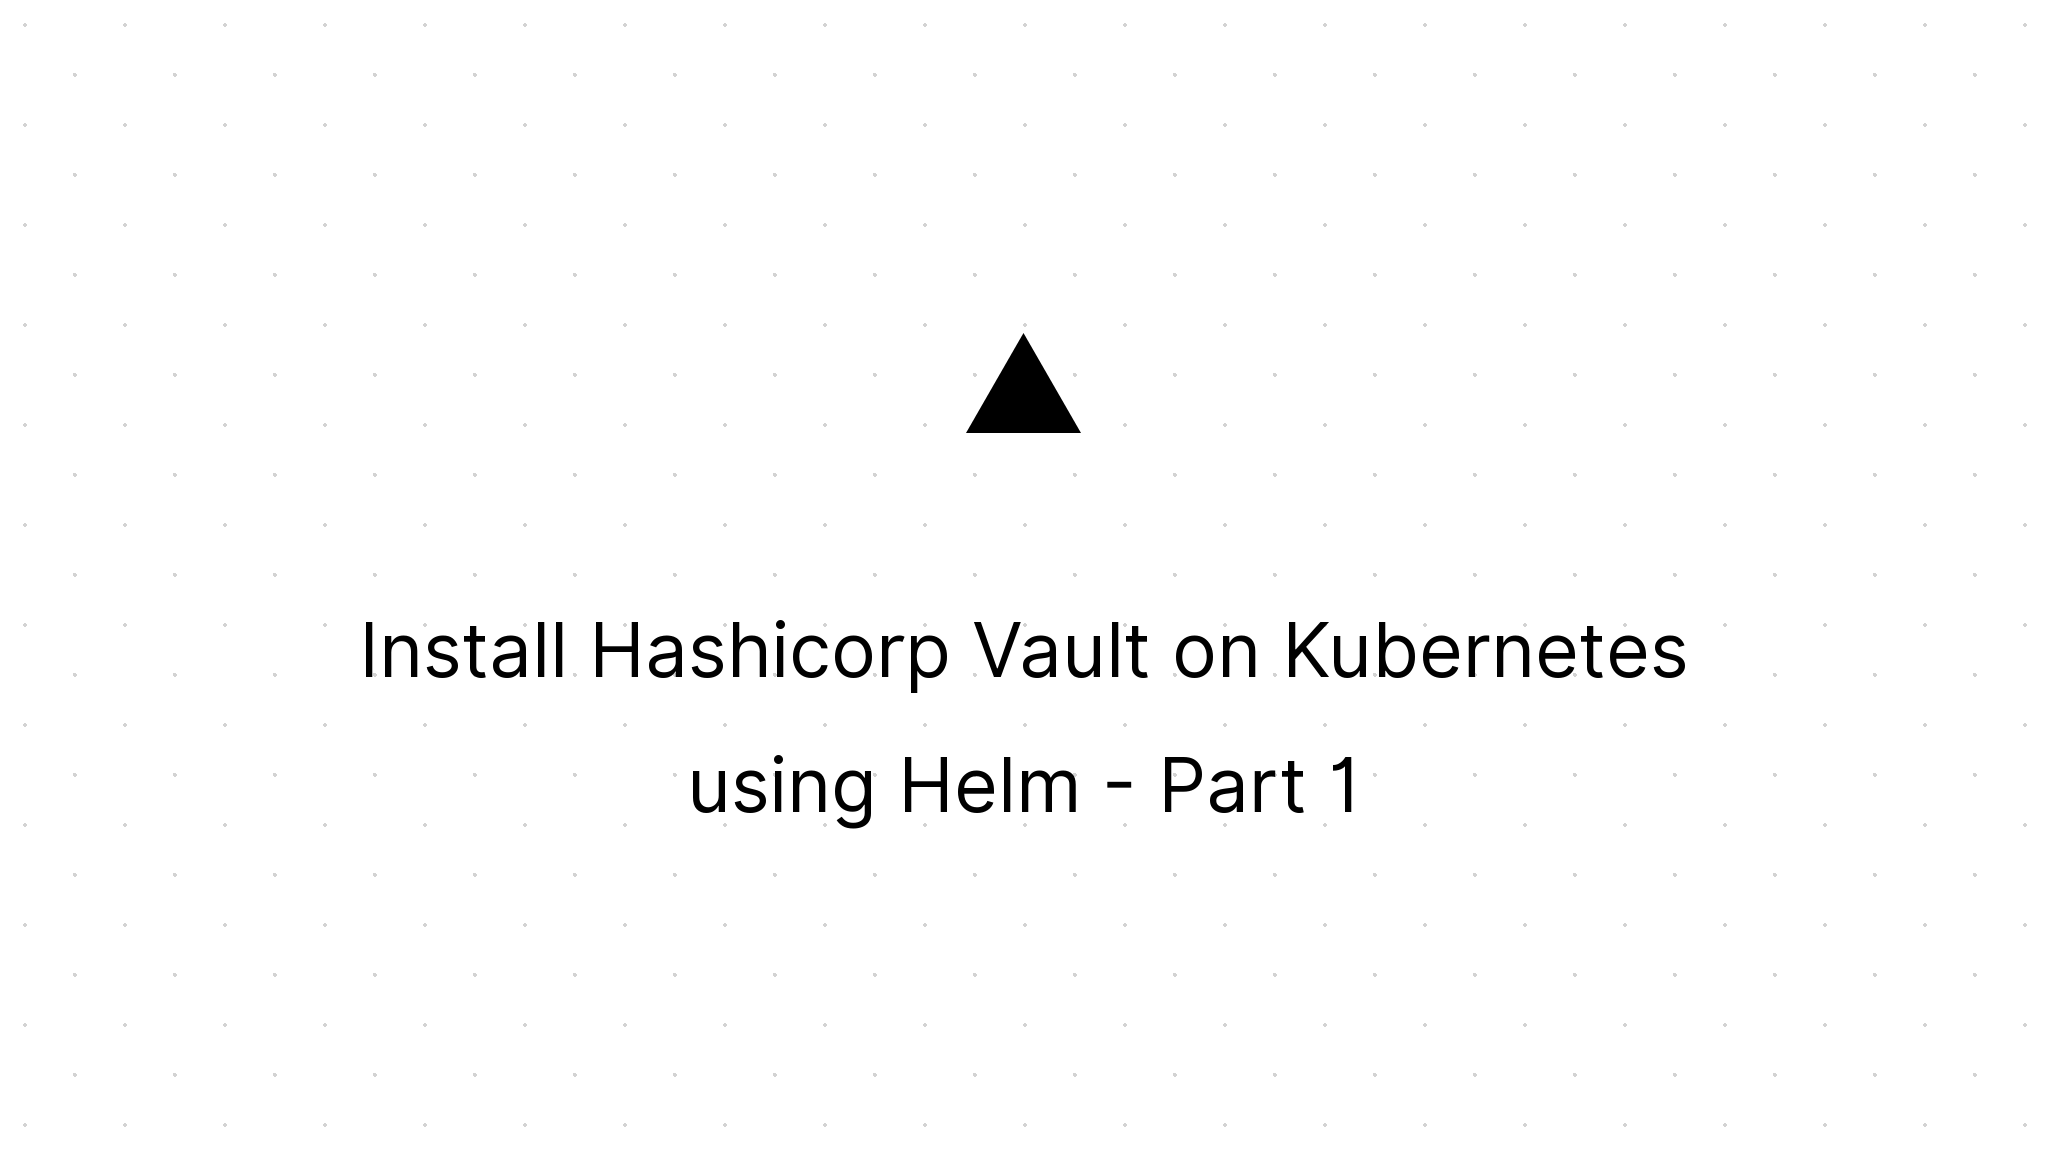 Cover Image for Install Hashicorp Vault on Kubernetes using Helm - Part 1